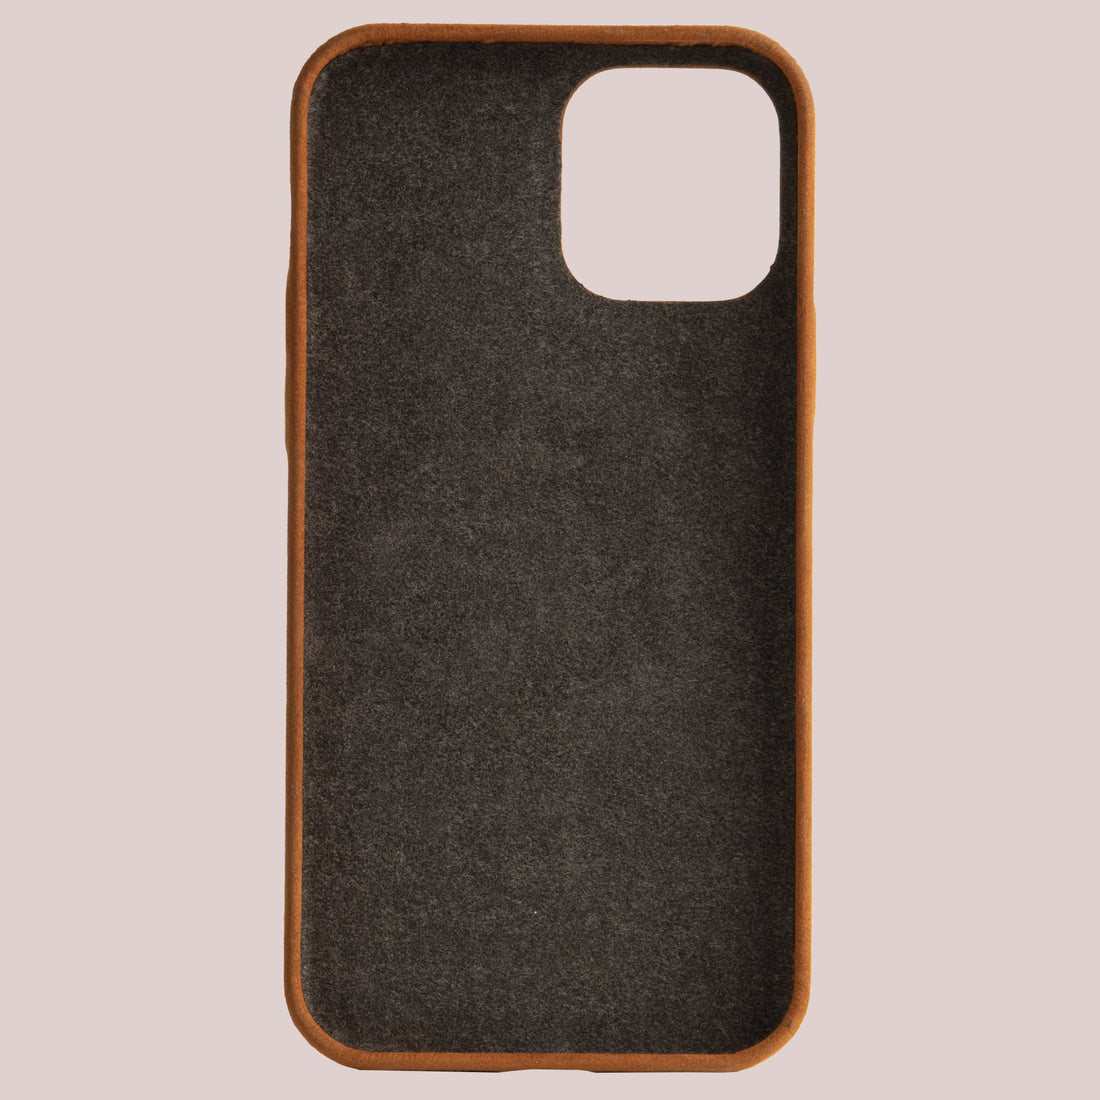 Baxter Card Case for iPhone 13 - Onyx Black